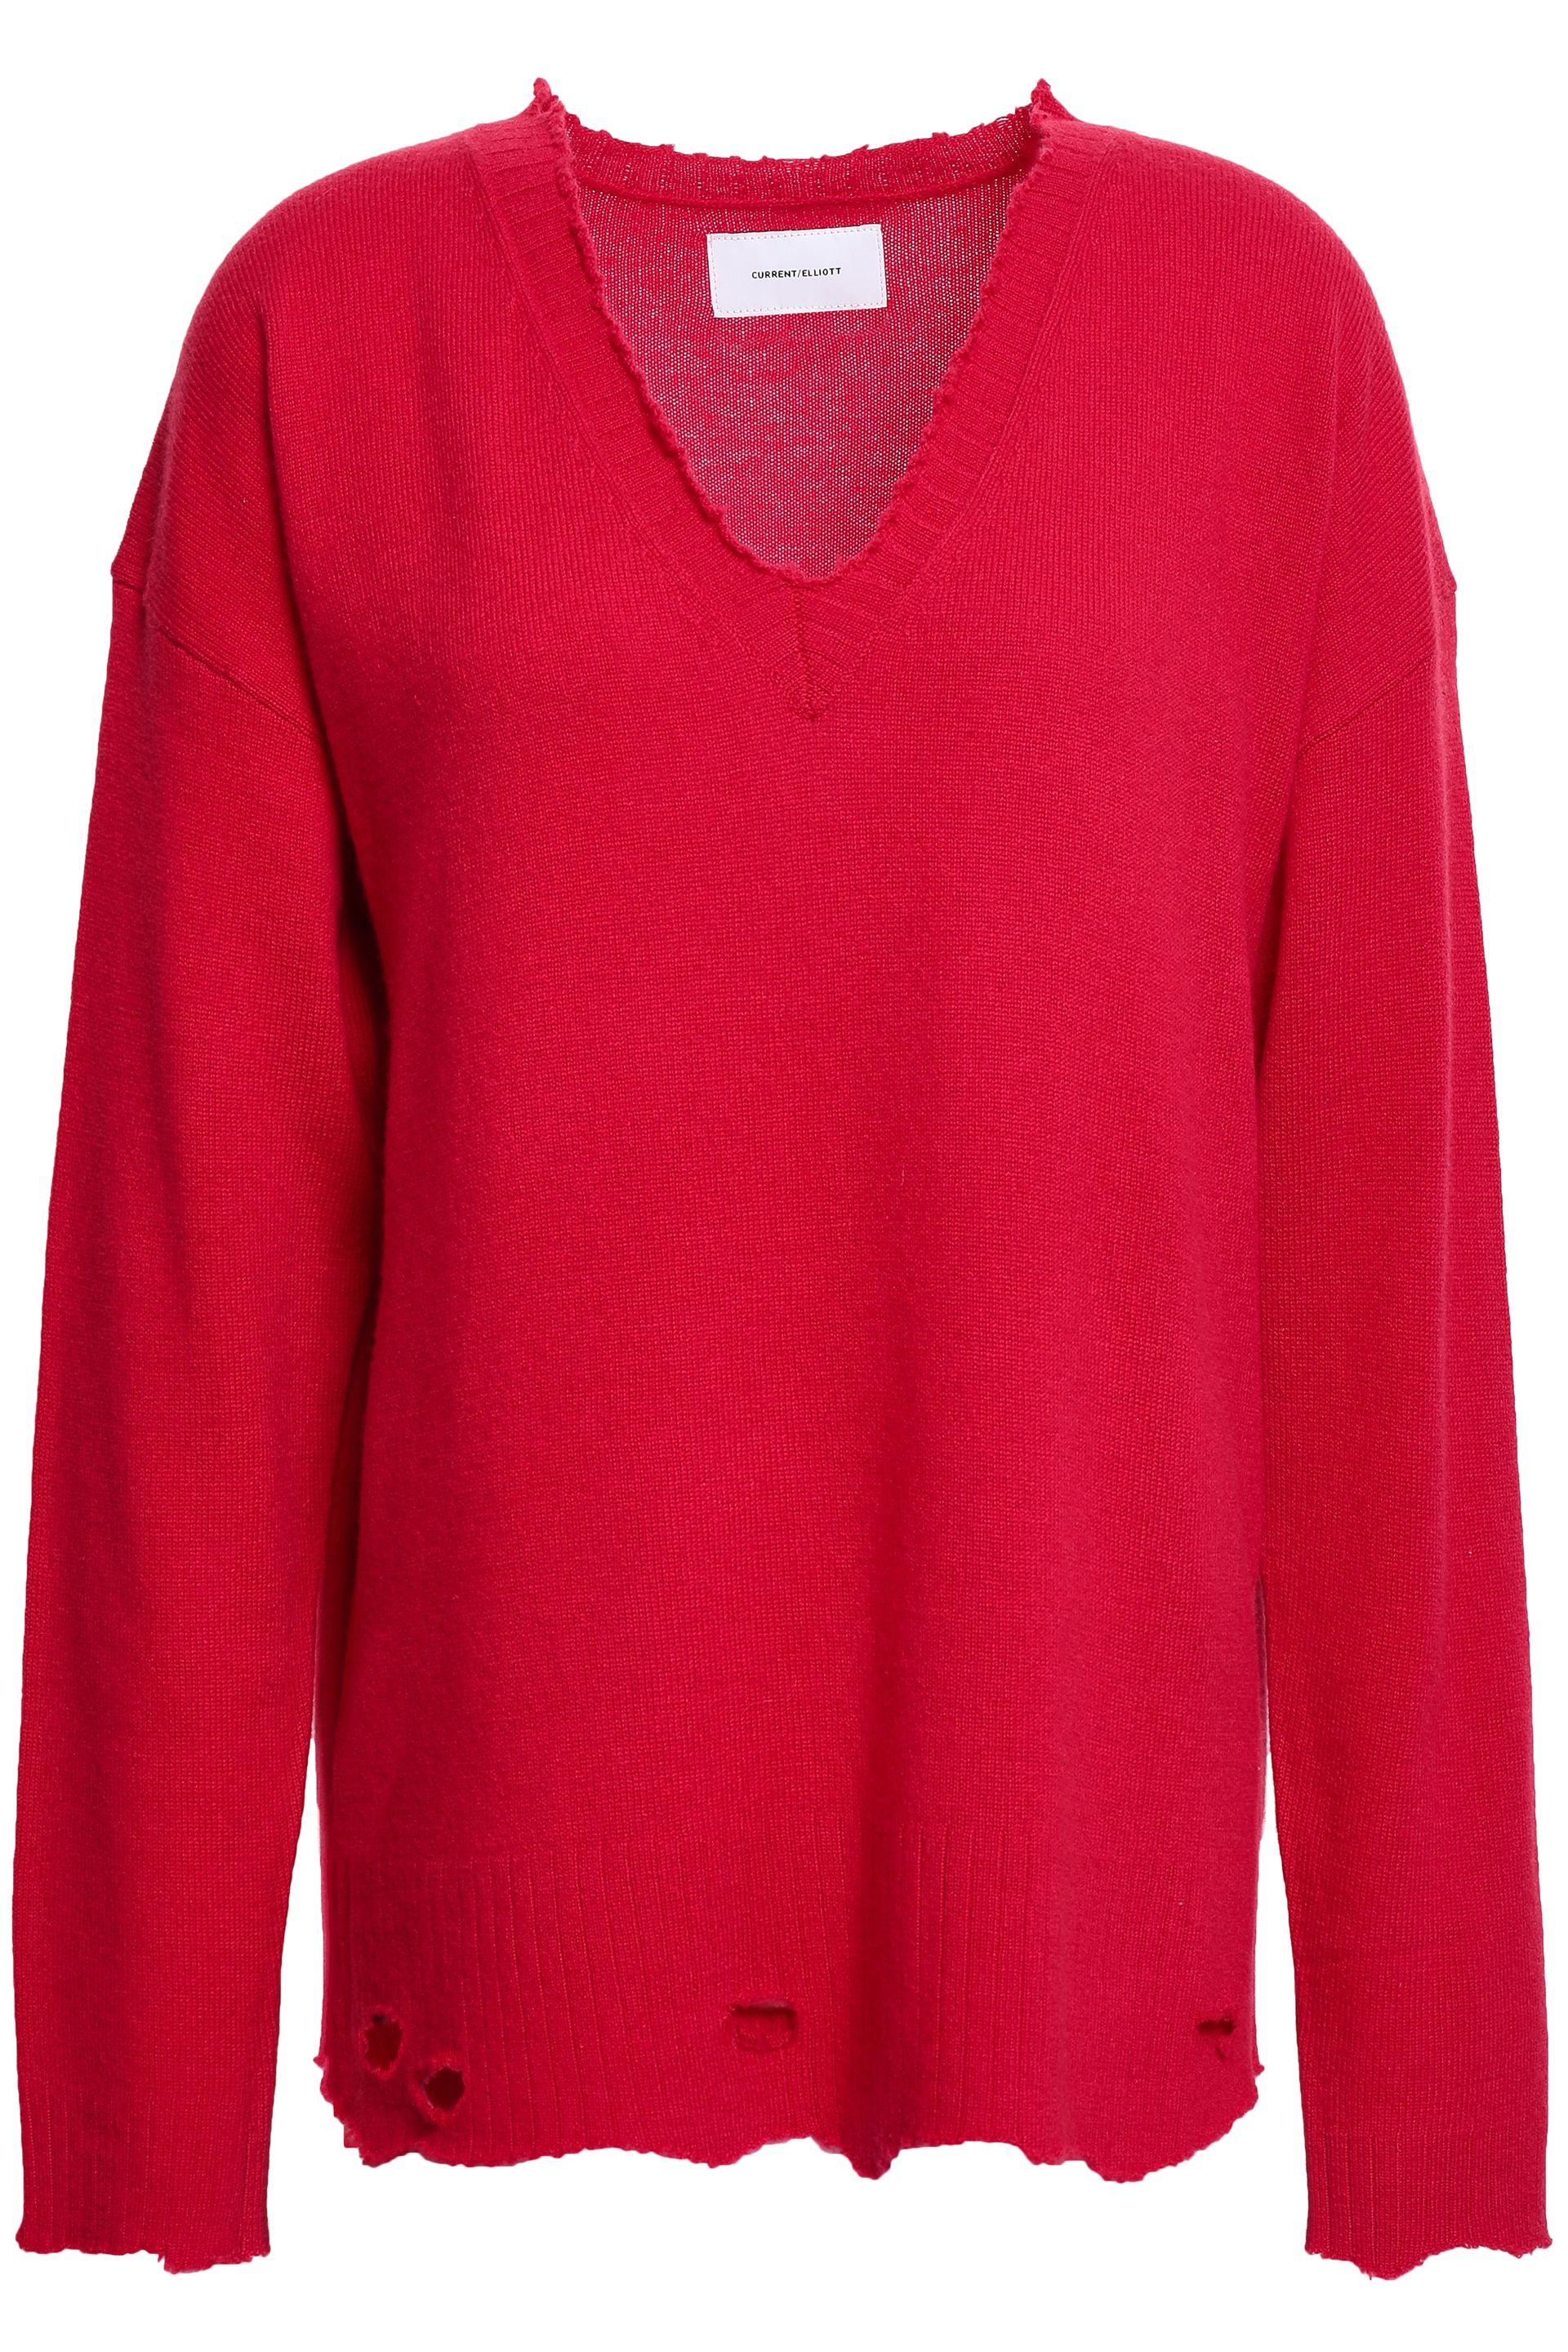 Current/Elliott Distressed Wool And Cashmere-blend Sweater Crimson in ...